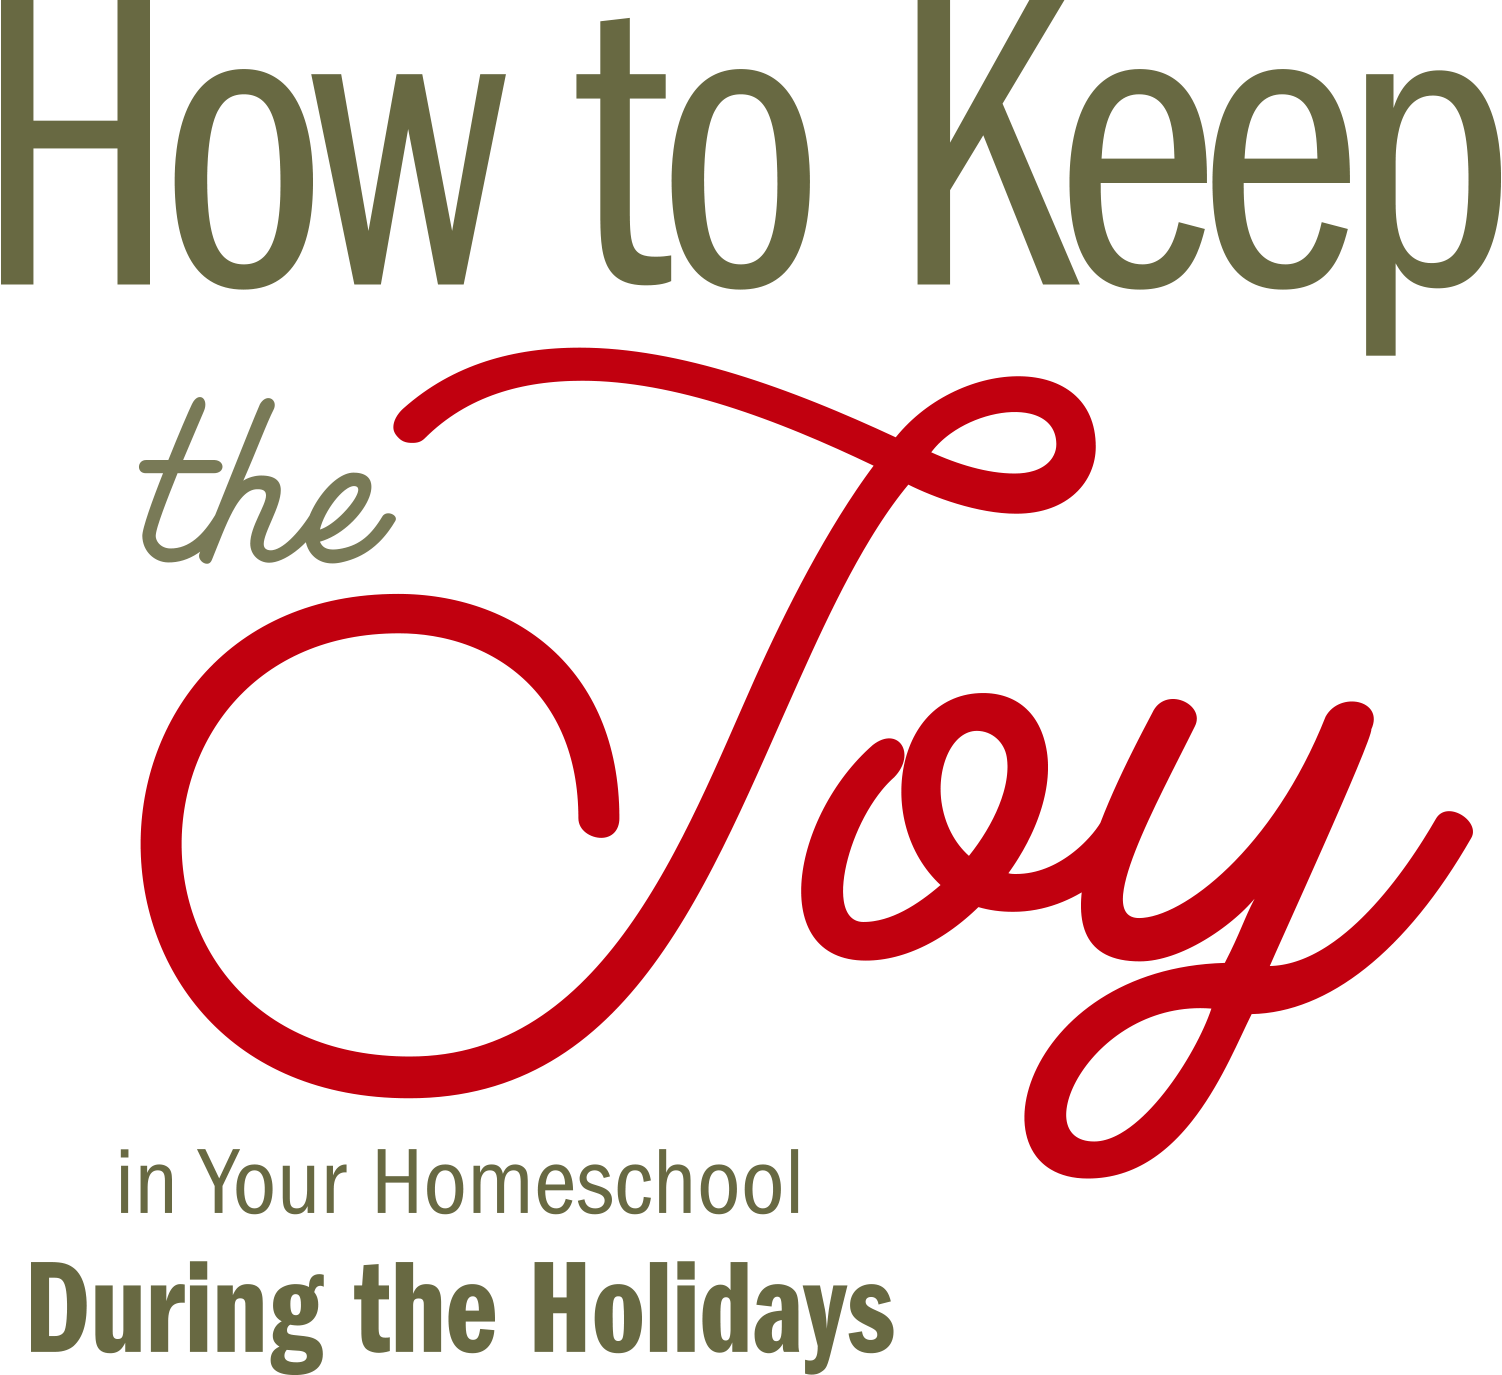 How to Keep the Joy in Your Homeschool During the Holidays typography